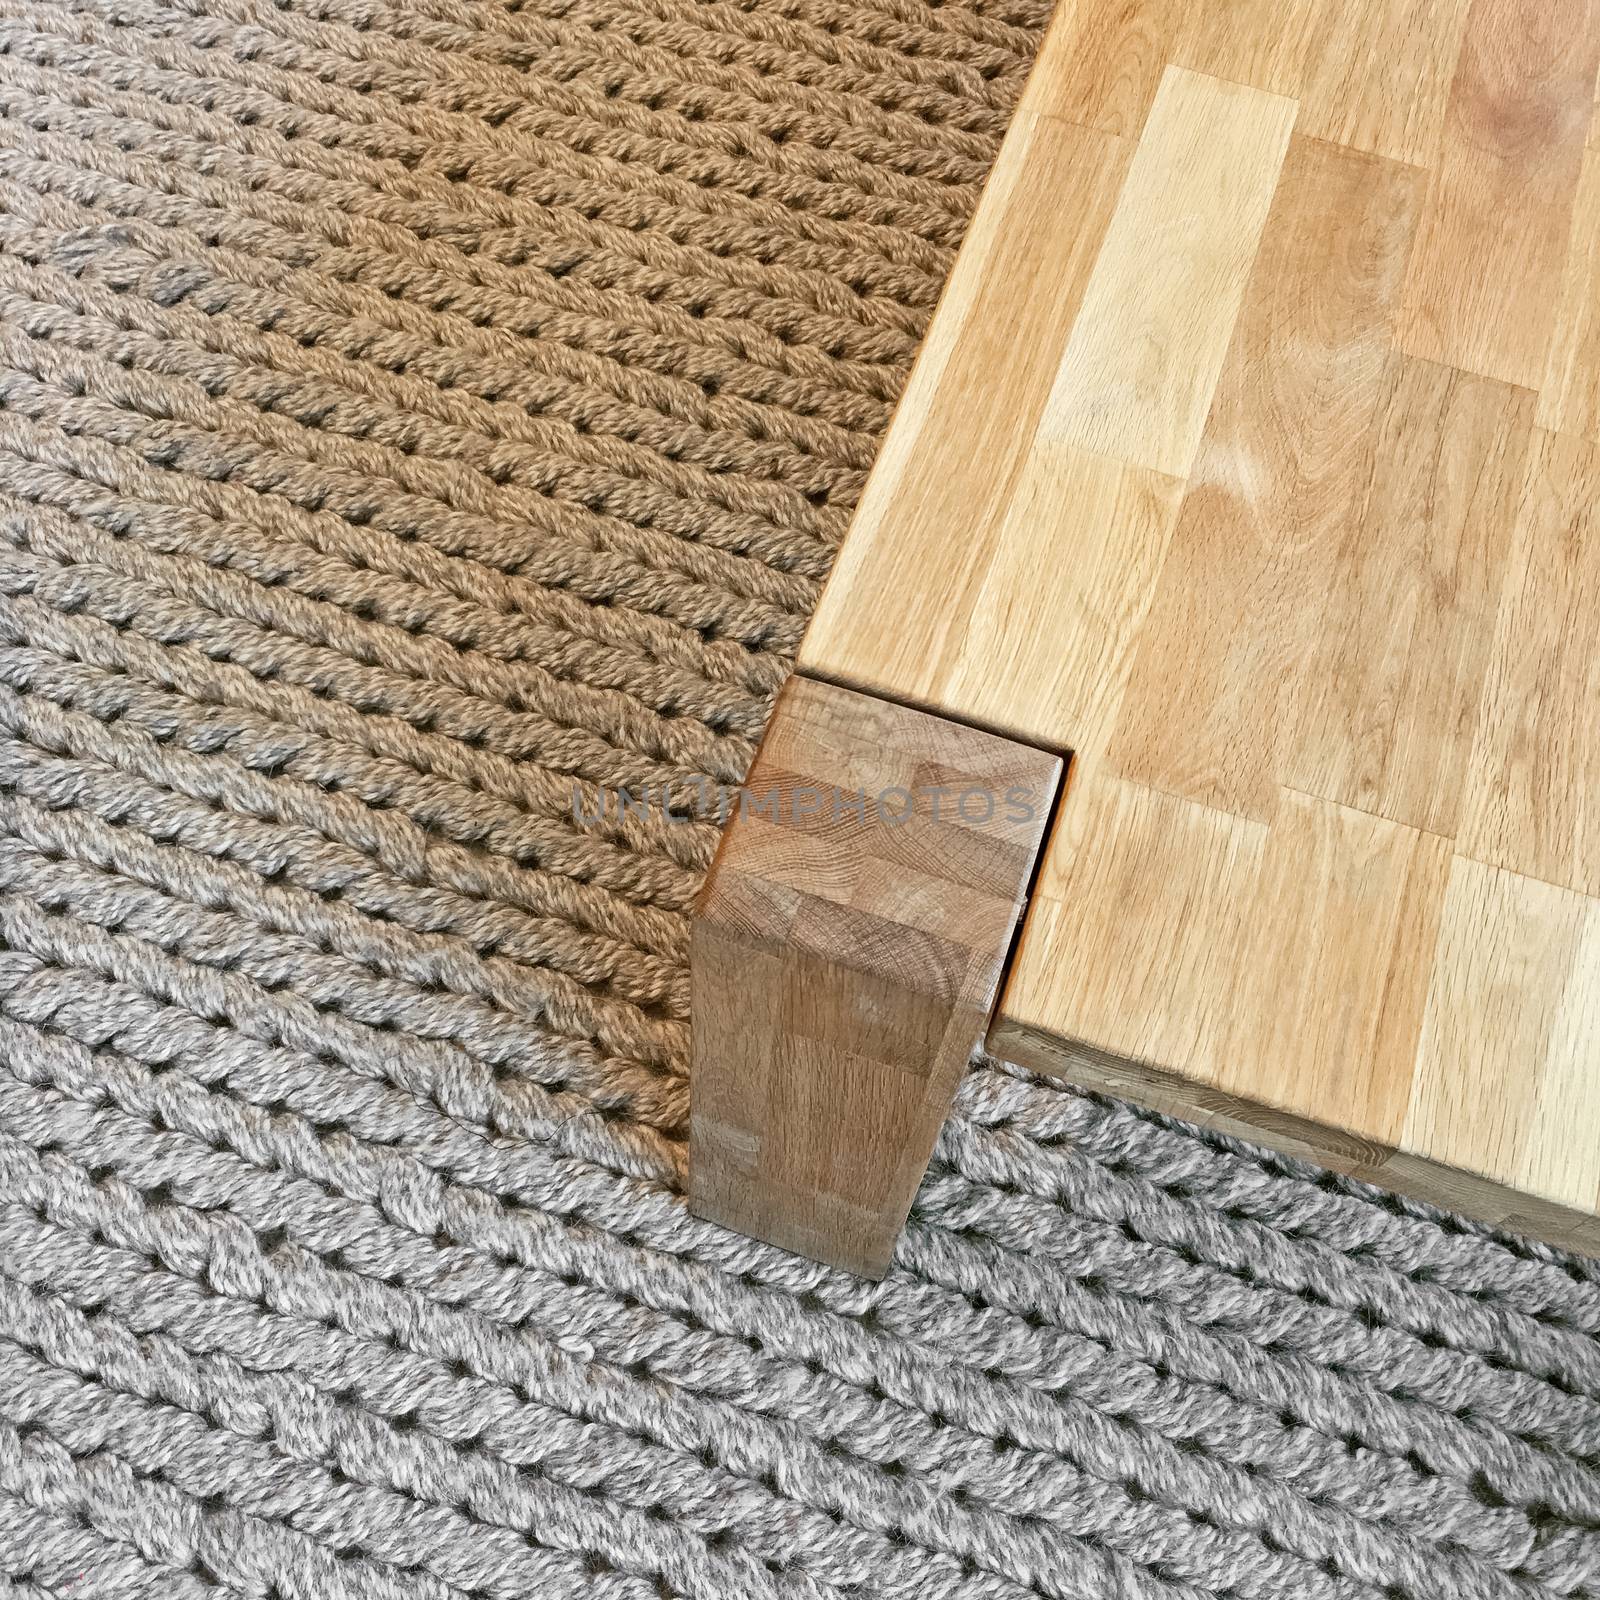 Wooden table on gray knitted carpet by anikasalsera